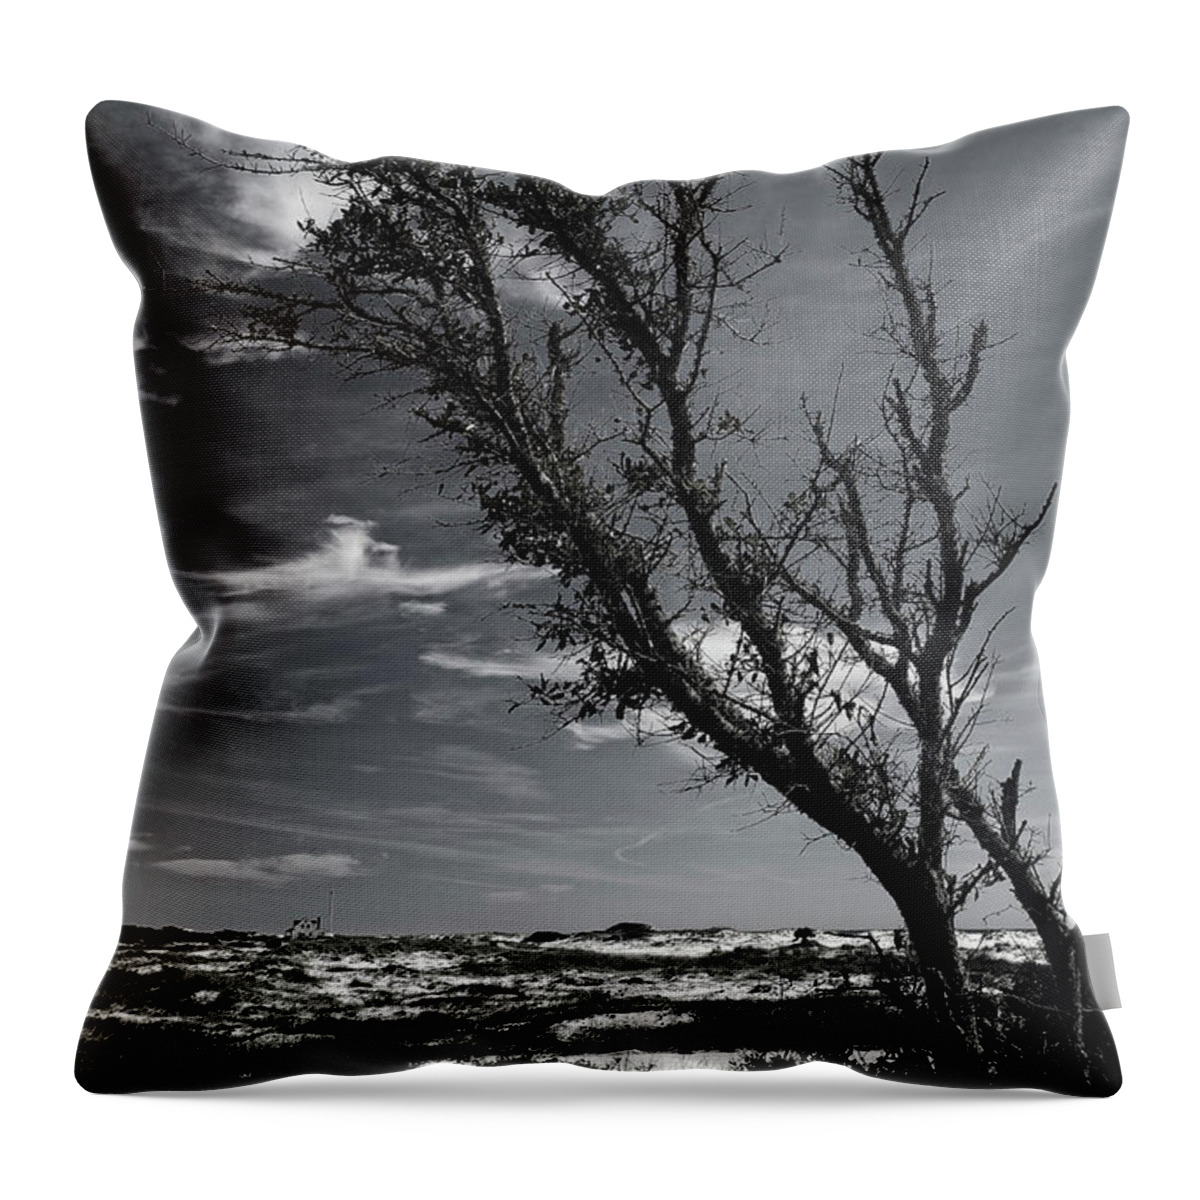 Sand Throw Pillow featuring the photograph Beach Tree by George Taylor